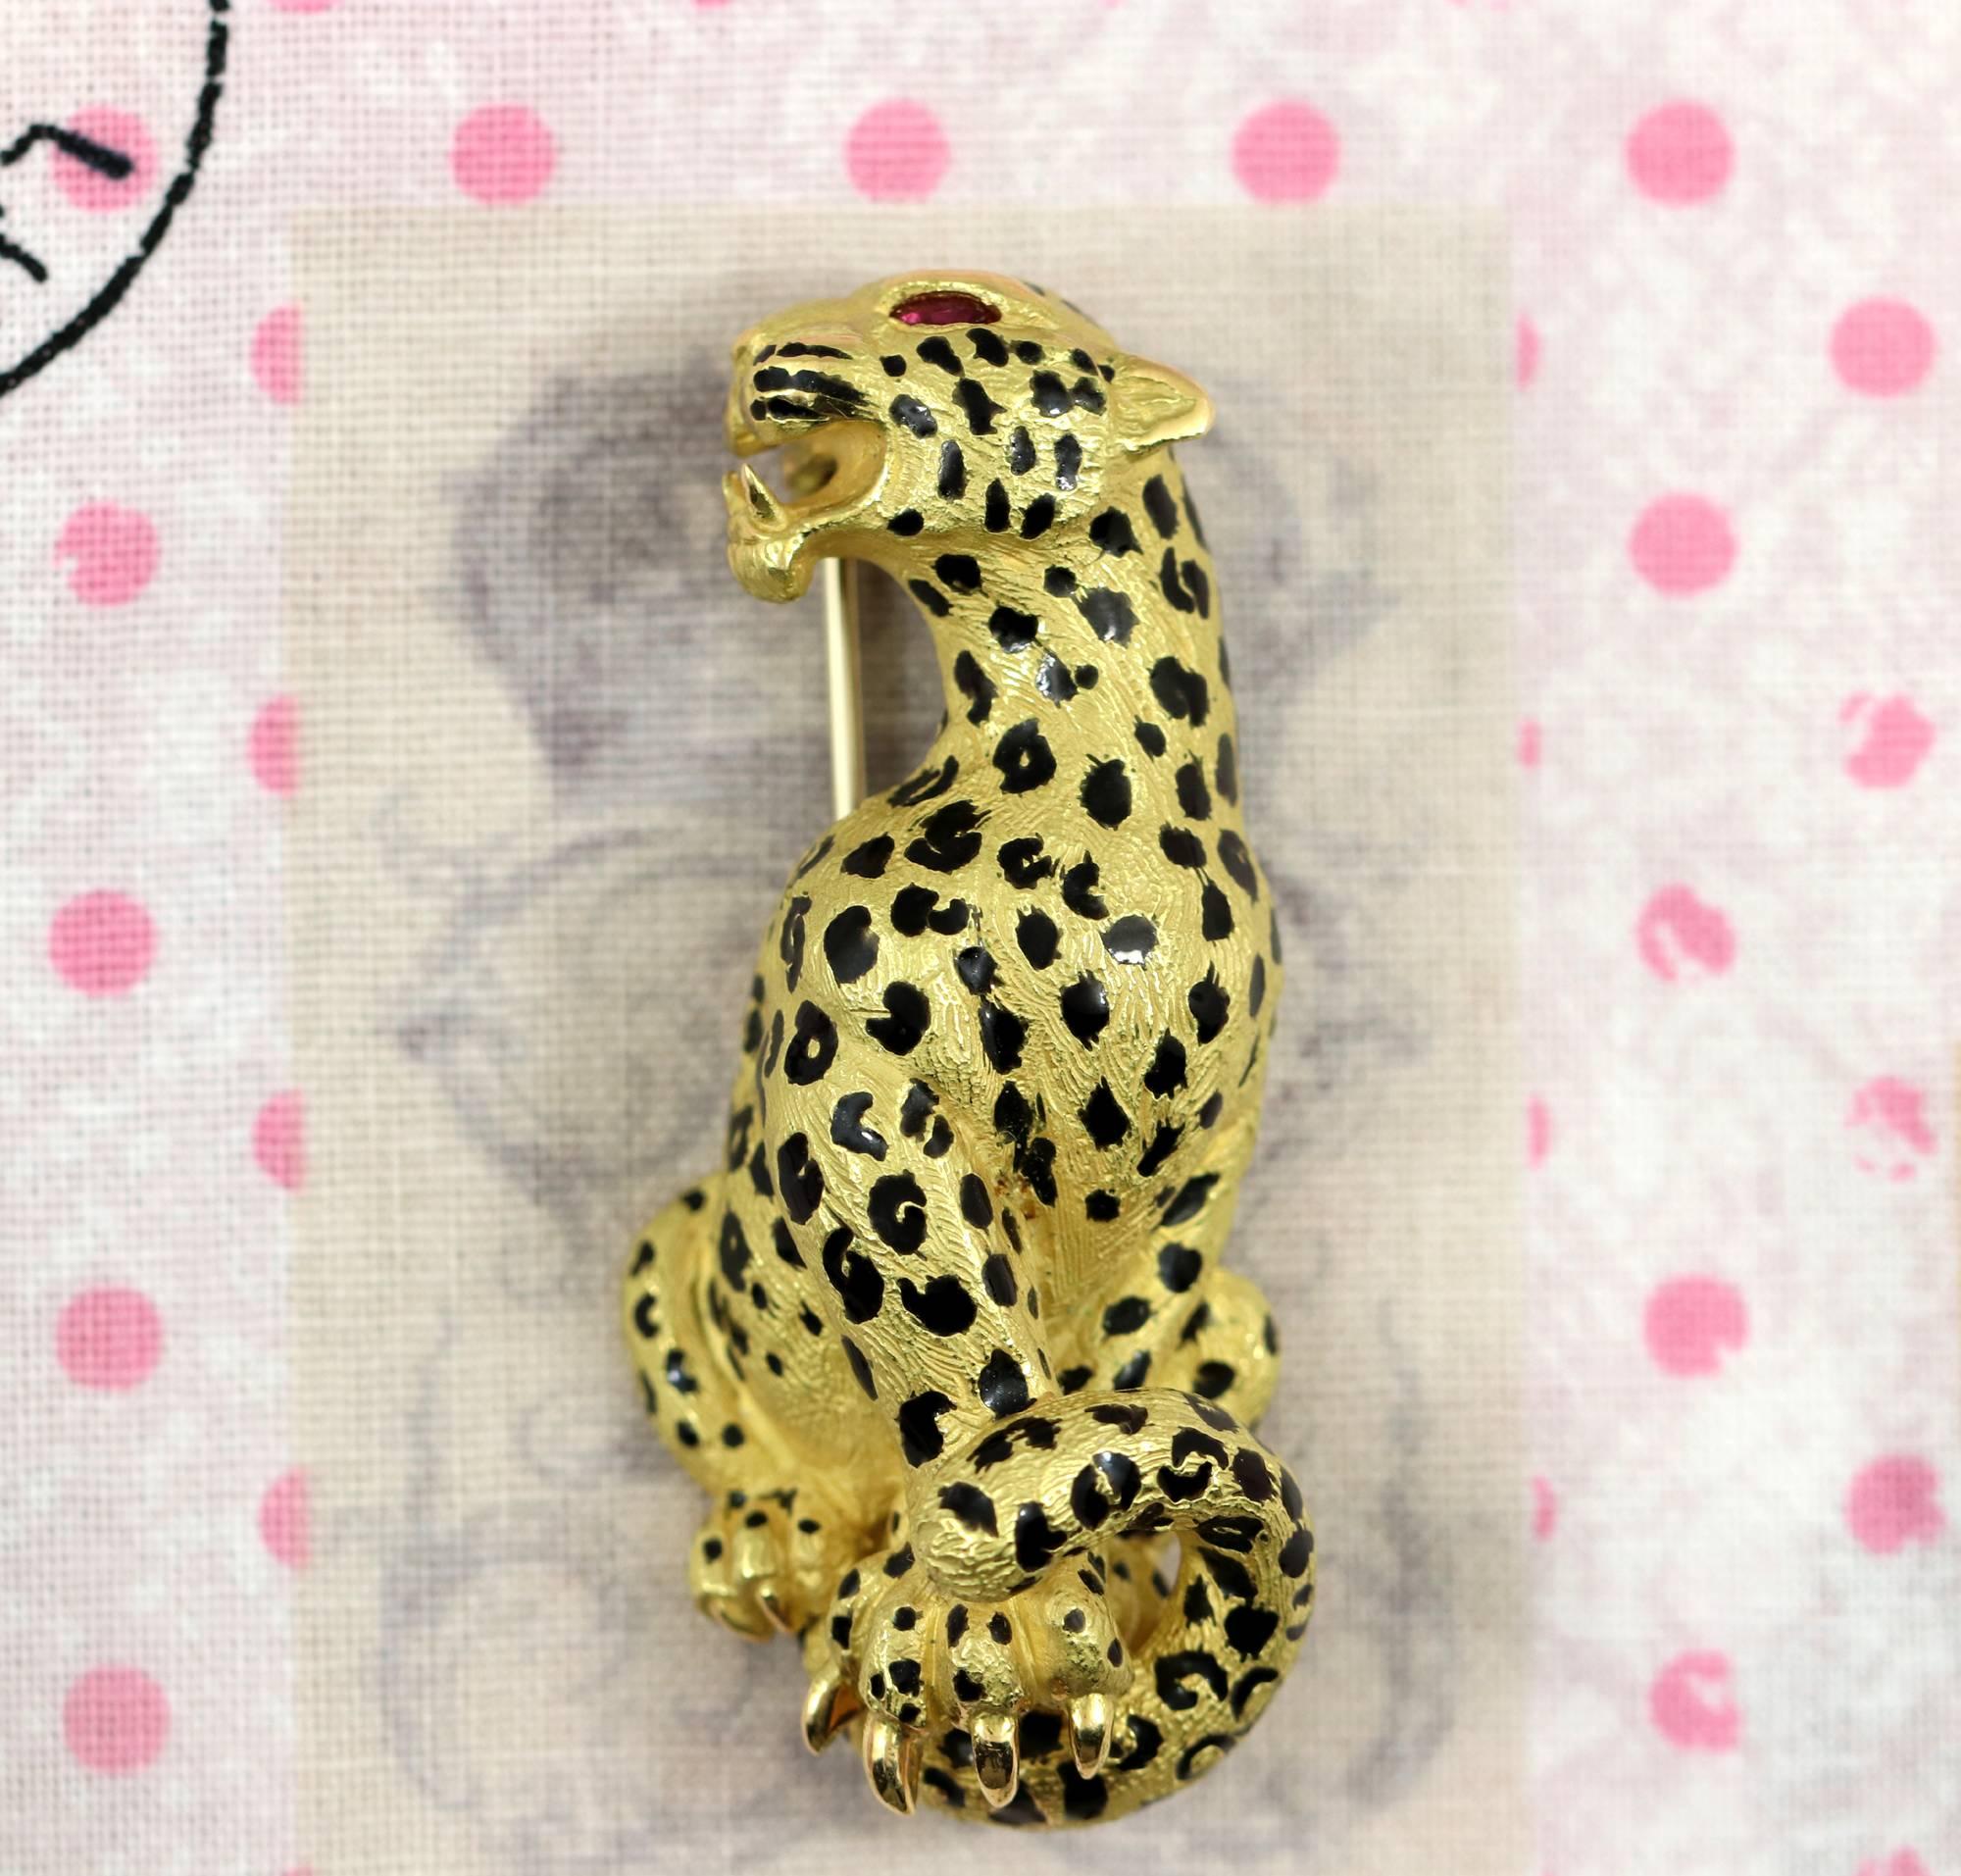 An 18K yellow gold brooch measuring 1 7/8 inches long, and 3/4 of an inch wide, detailed with black enamel, to give this big cat it's spots. With a ruby eye for drama, it is truly wild. Featuring French Hallmarks, it weighs 23.6 grams.